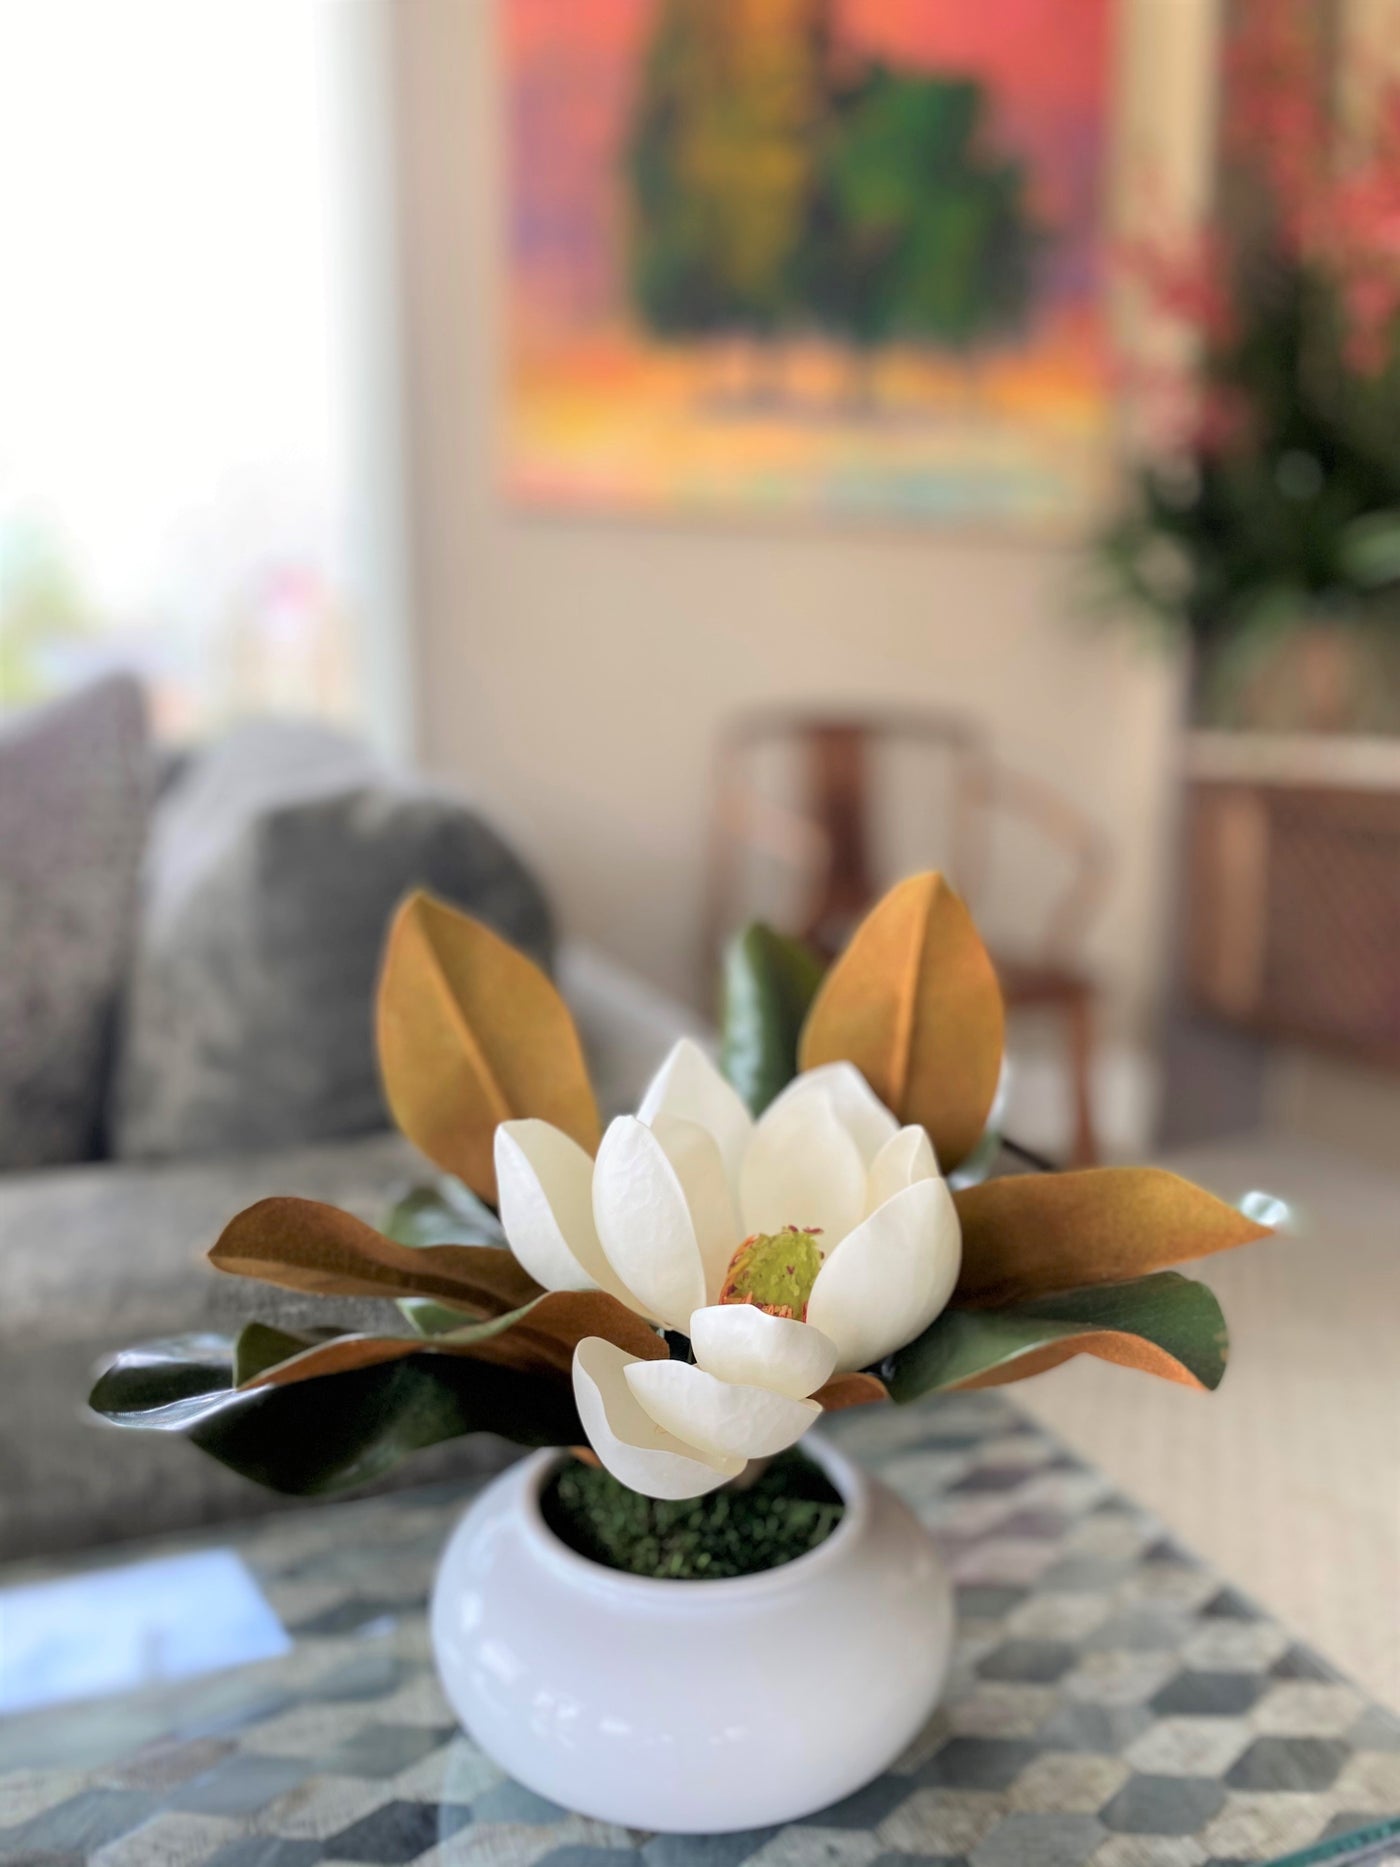 Magnolia with Bloom in Porcelain Bowl